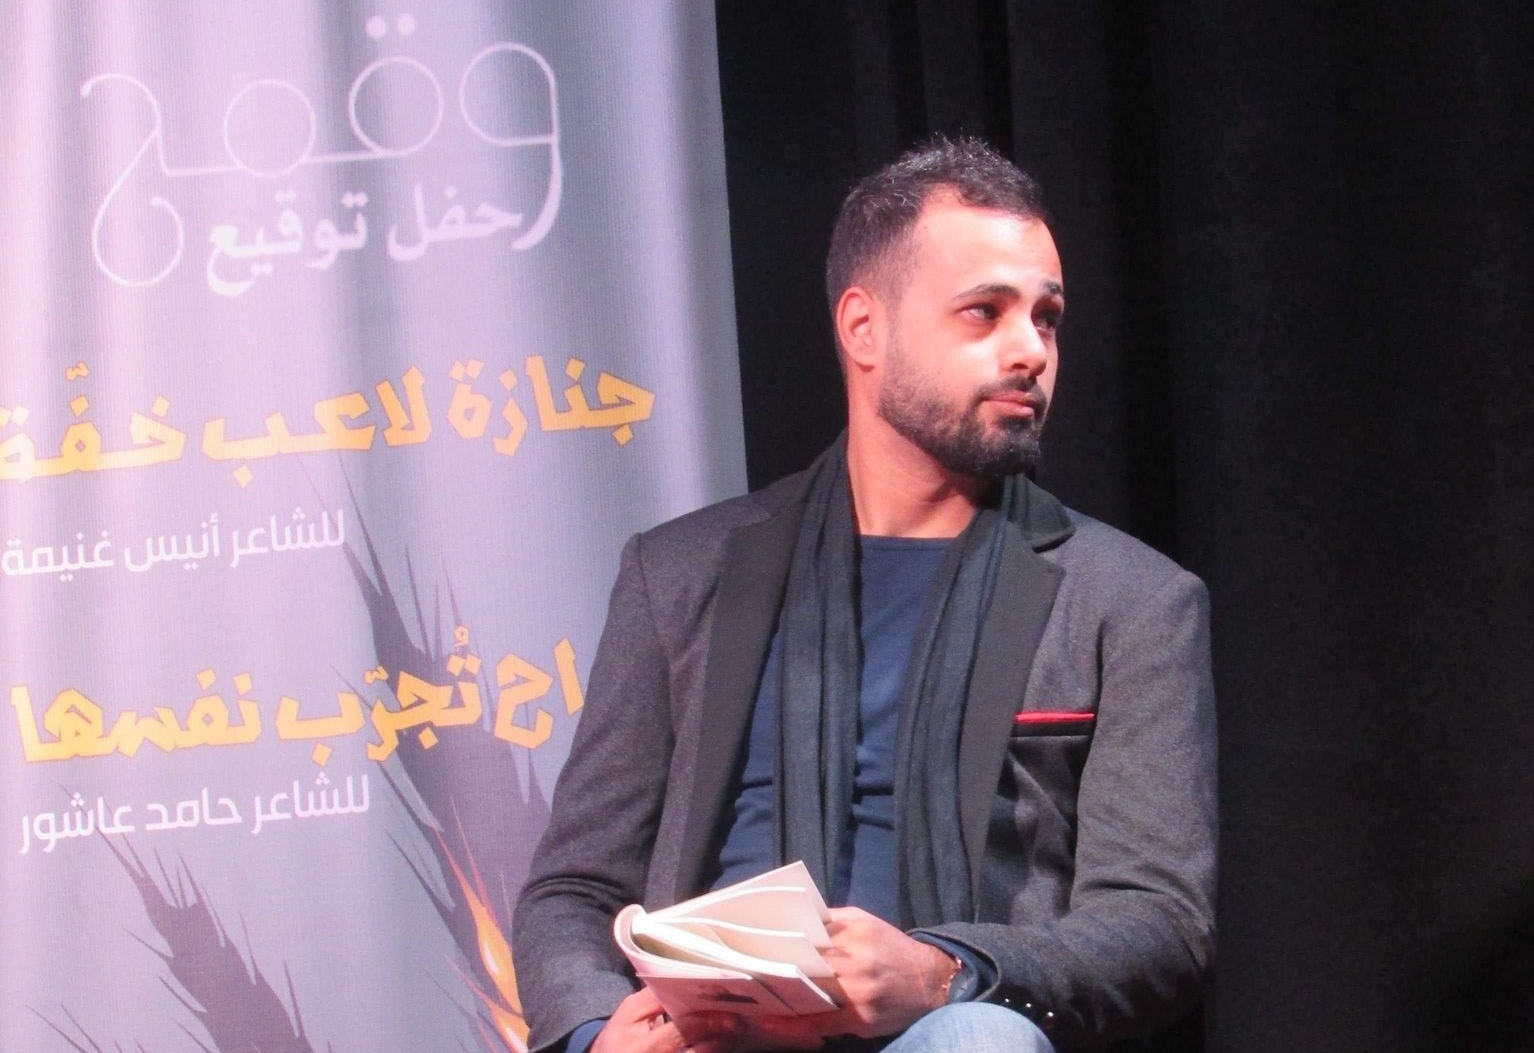 Anis Ghanima at an event honouring his award-winning poetry collection (Anees Ghanima)